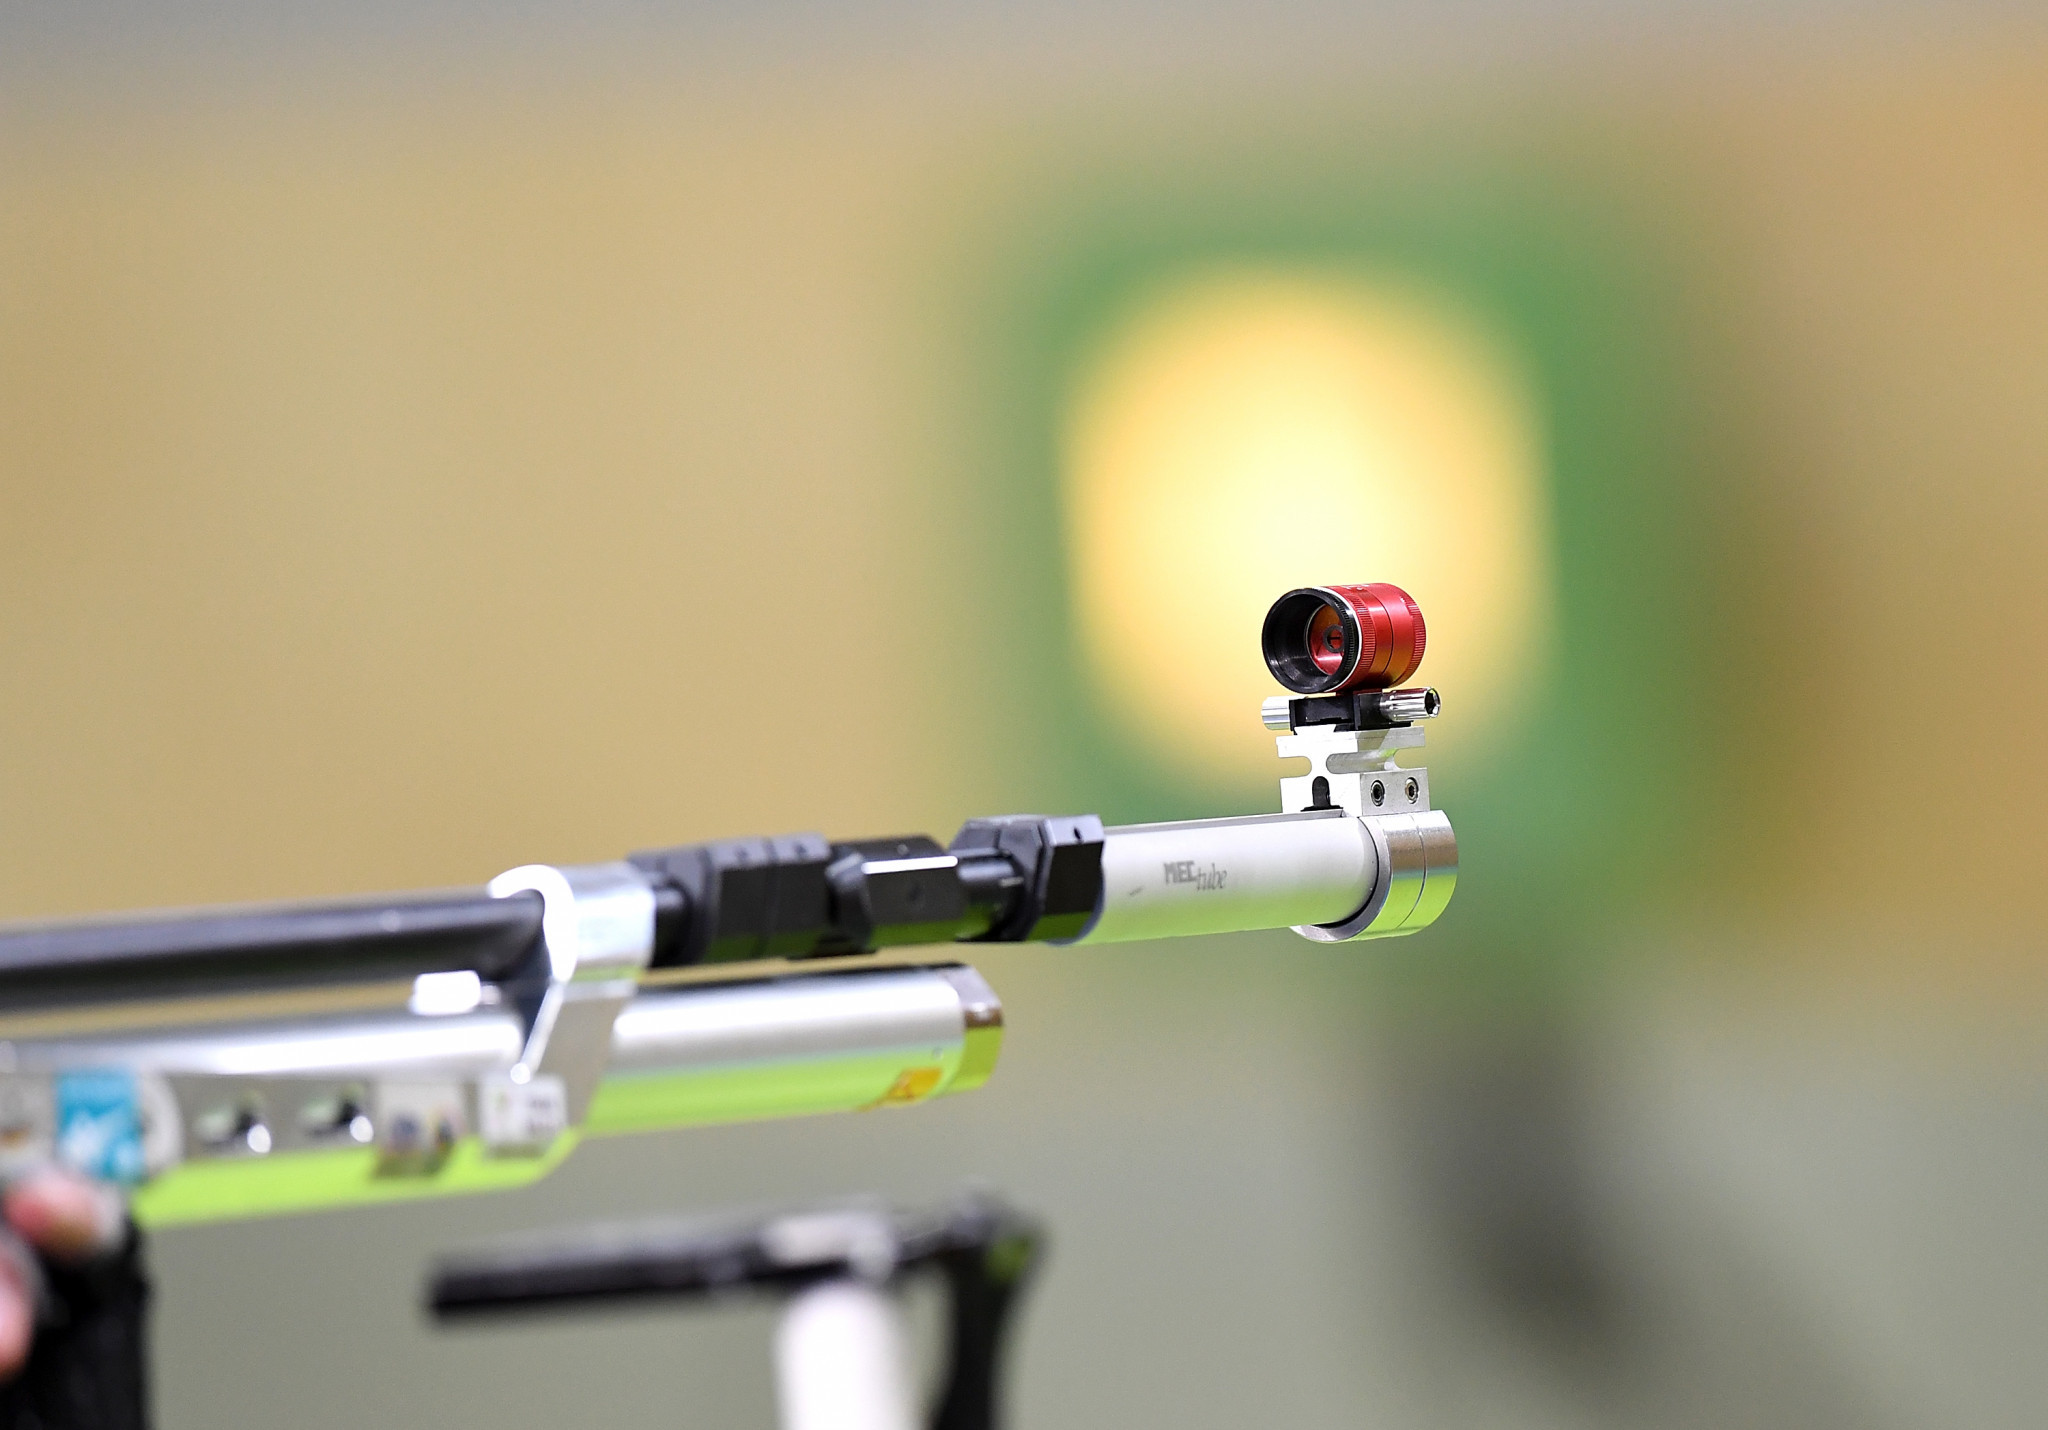 Thailand's Napis Tortungpanich scored 625.9 to reach the semi-finals of the men's 10m air rifle at the ISSF Grand Prix in Jakarta ©Getty Images